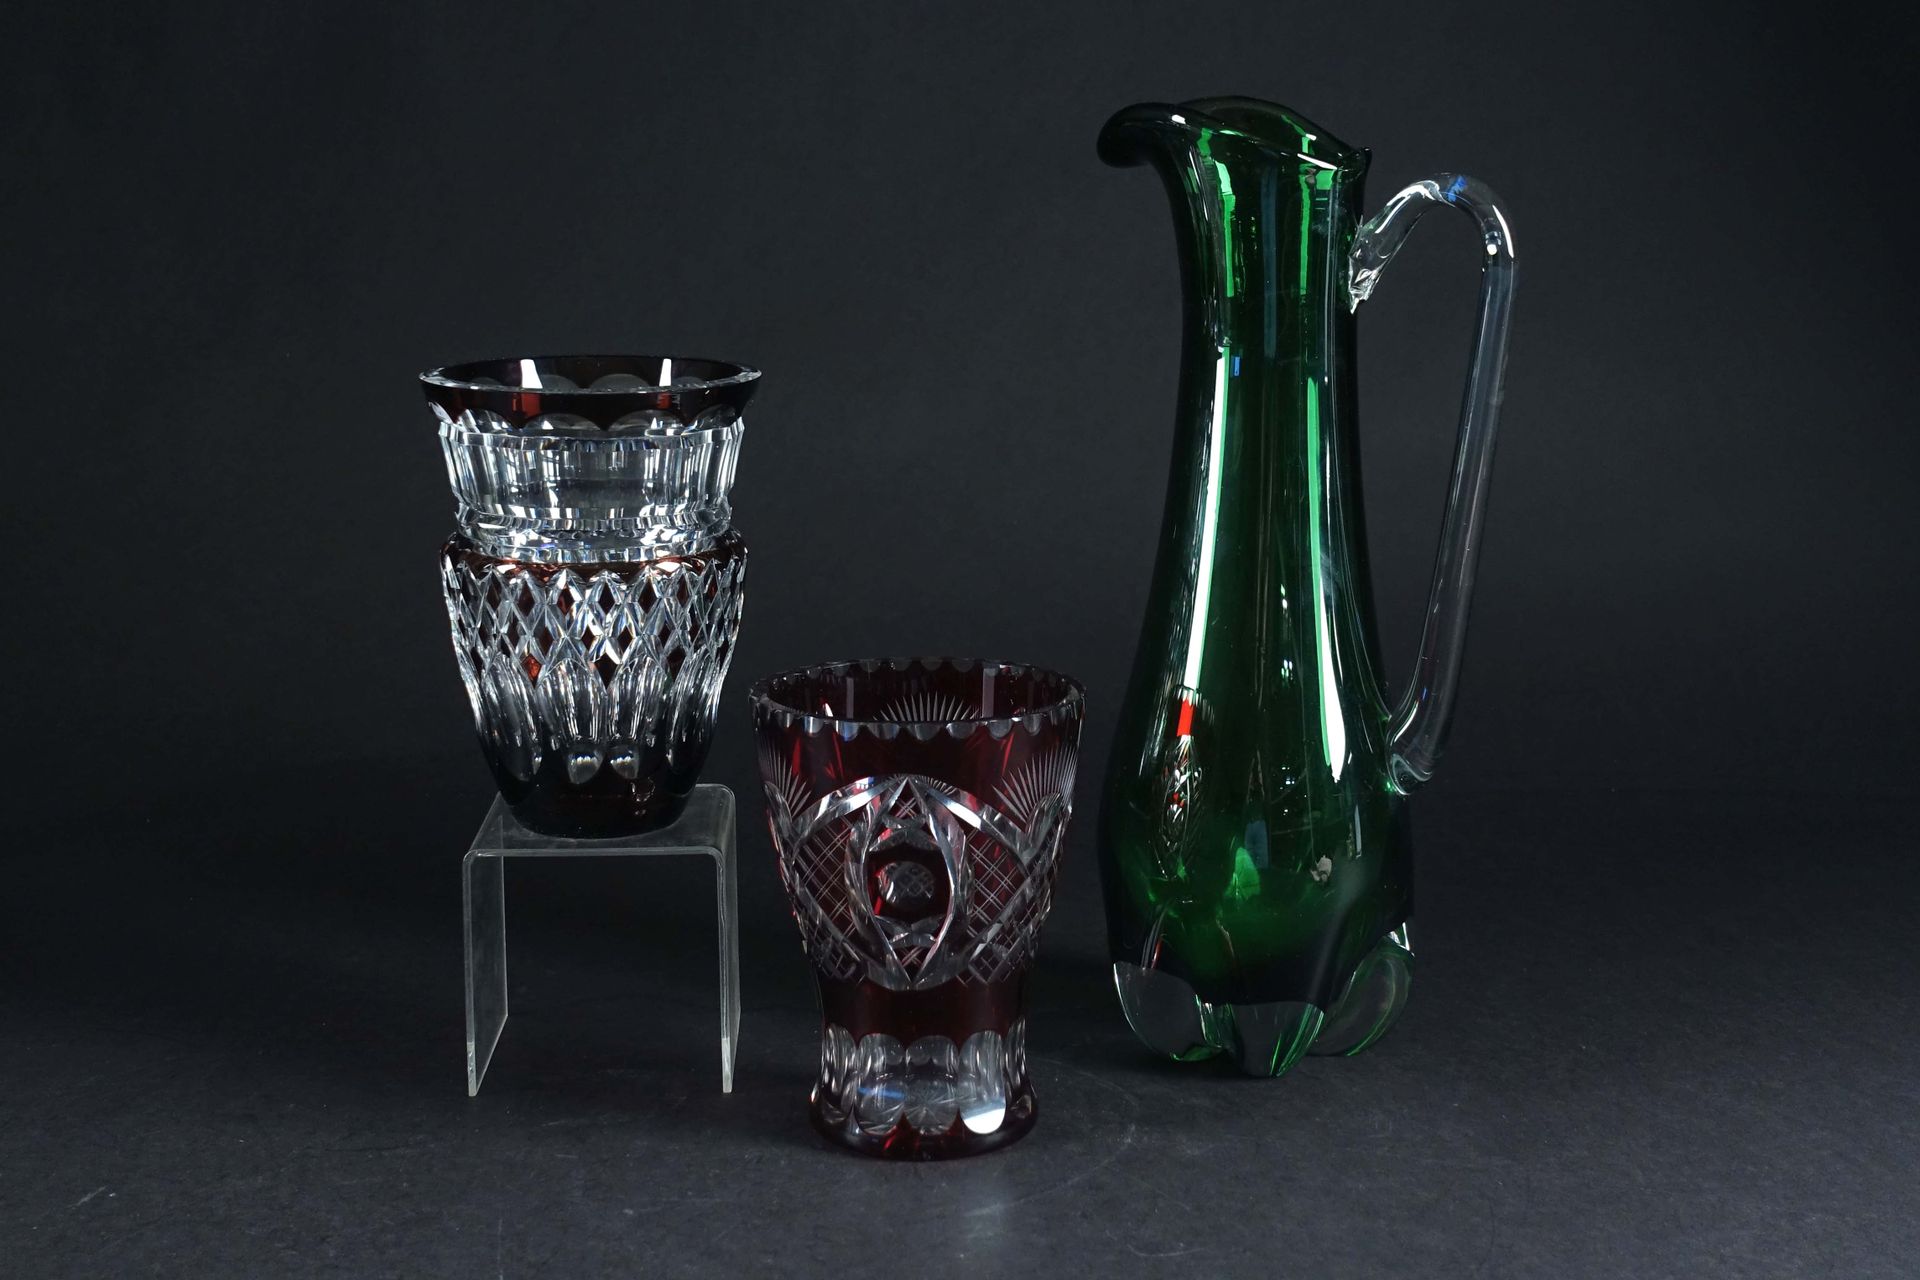 Lot. A large Murano colored glass pourer (height: 38 cm), a cut crystal vase fro&hellip;